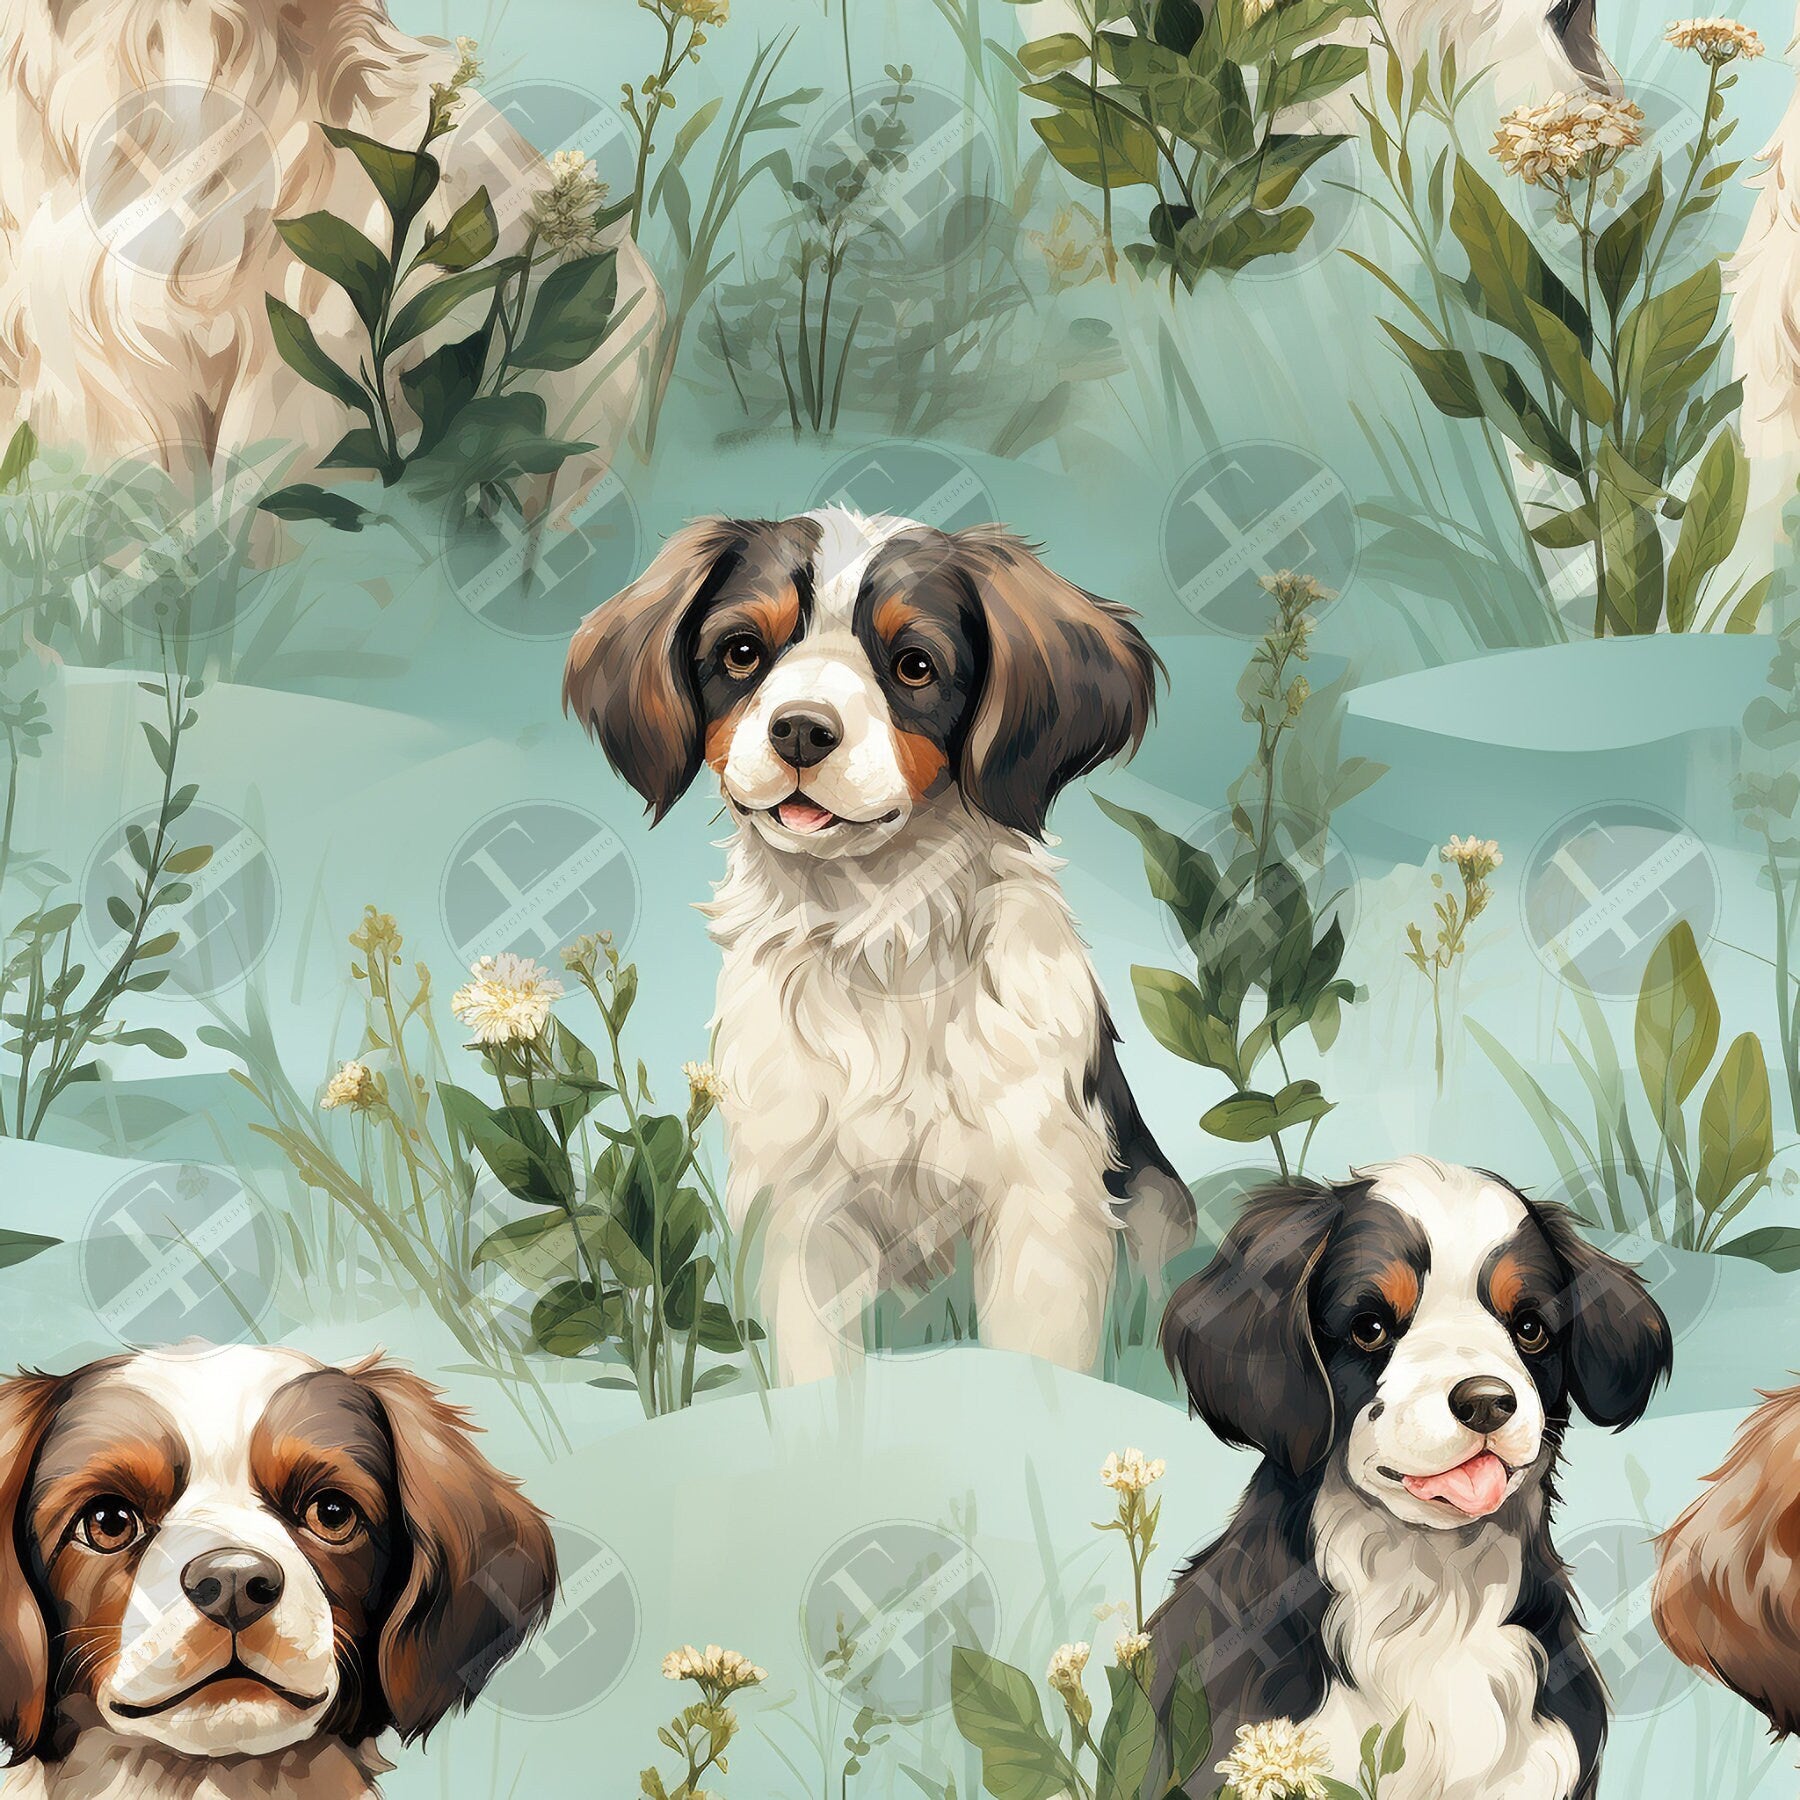 Puppy Seamless Patterns Digital Download PNG - Bundle of 8 - Shabby Chic Vintage Soft Watercolor Puppy Patterns - Commercial & Personal Use